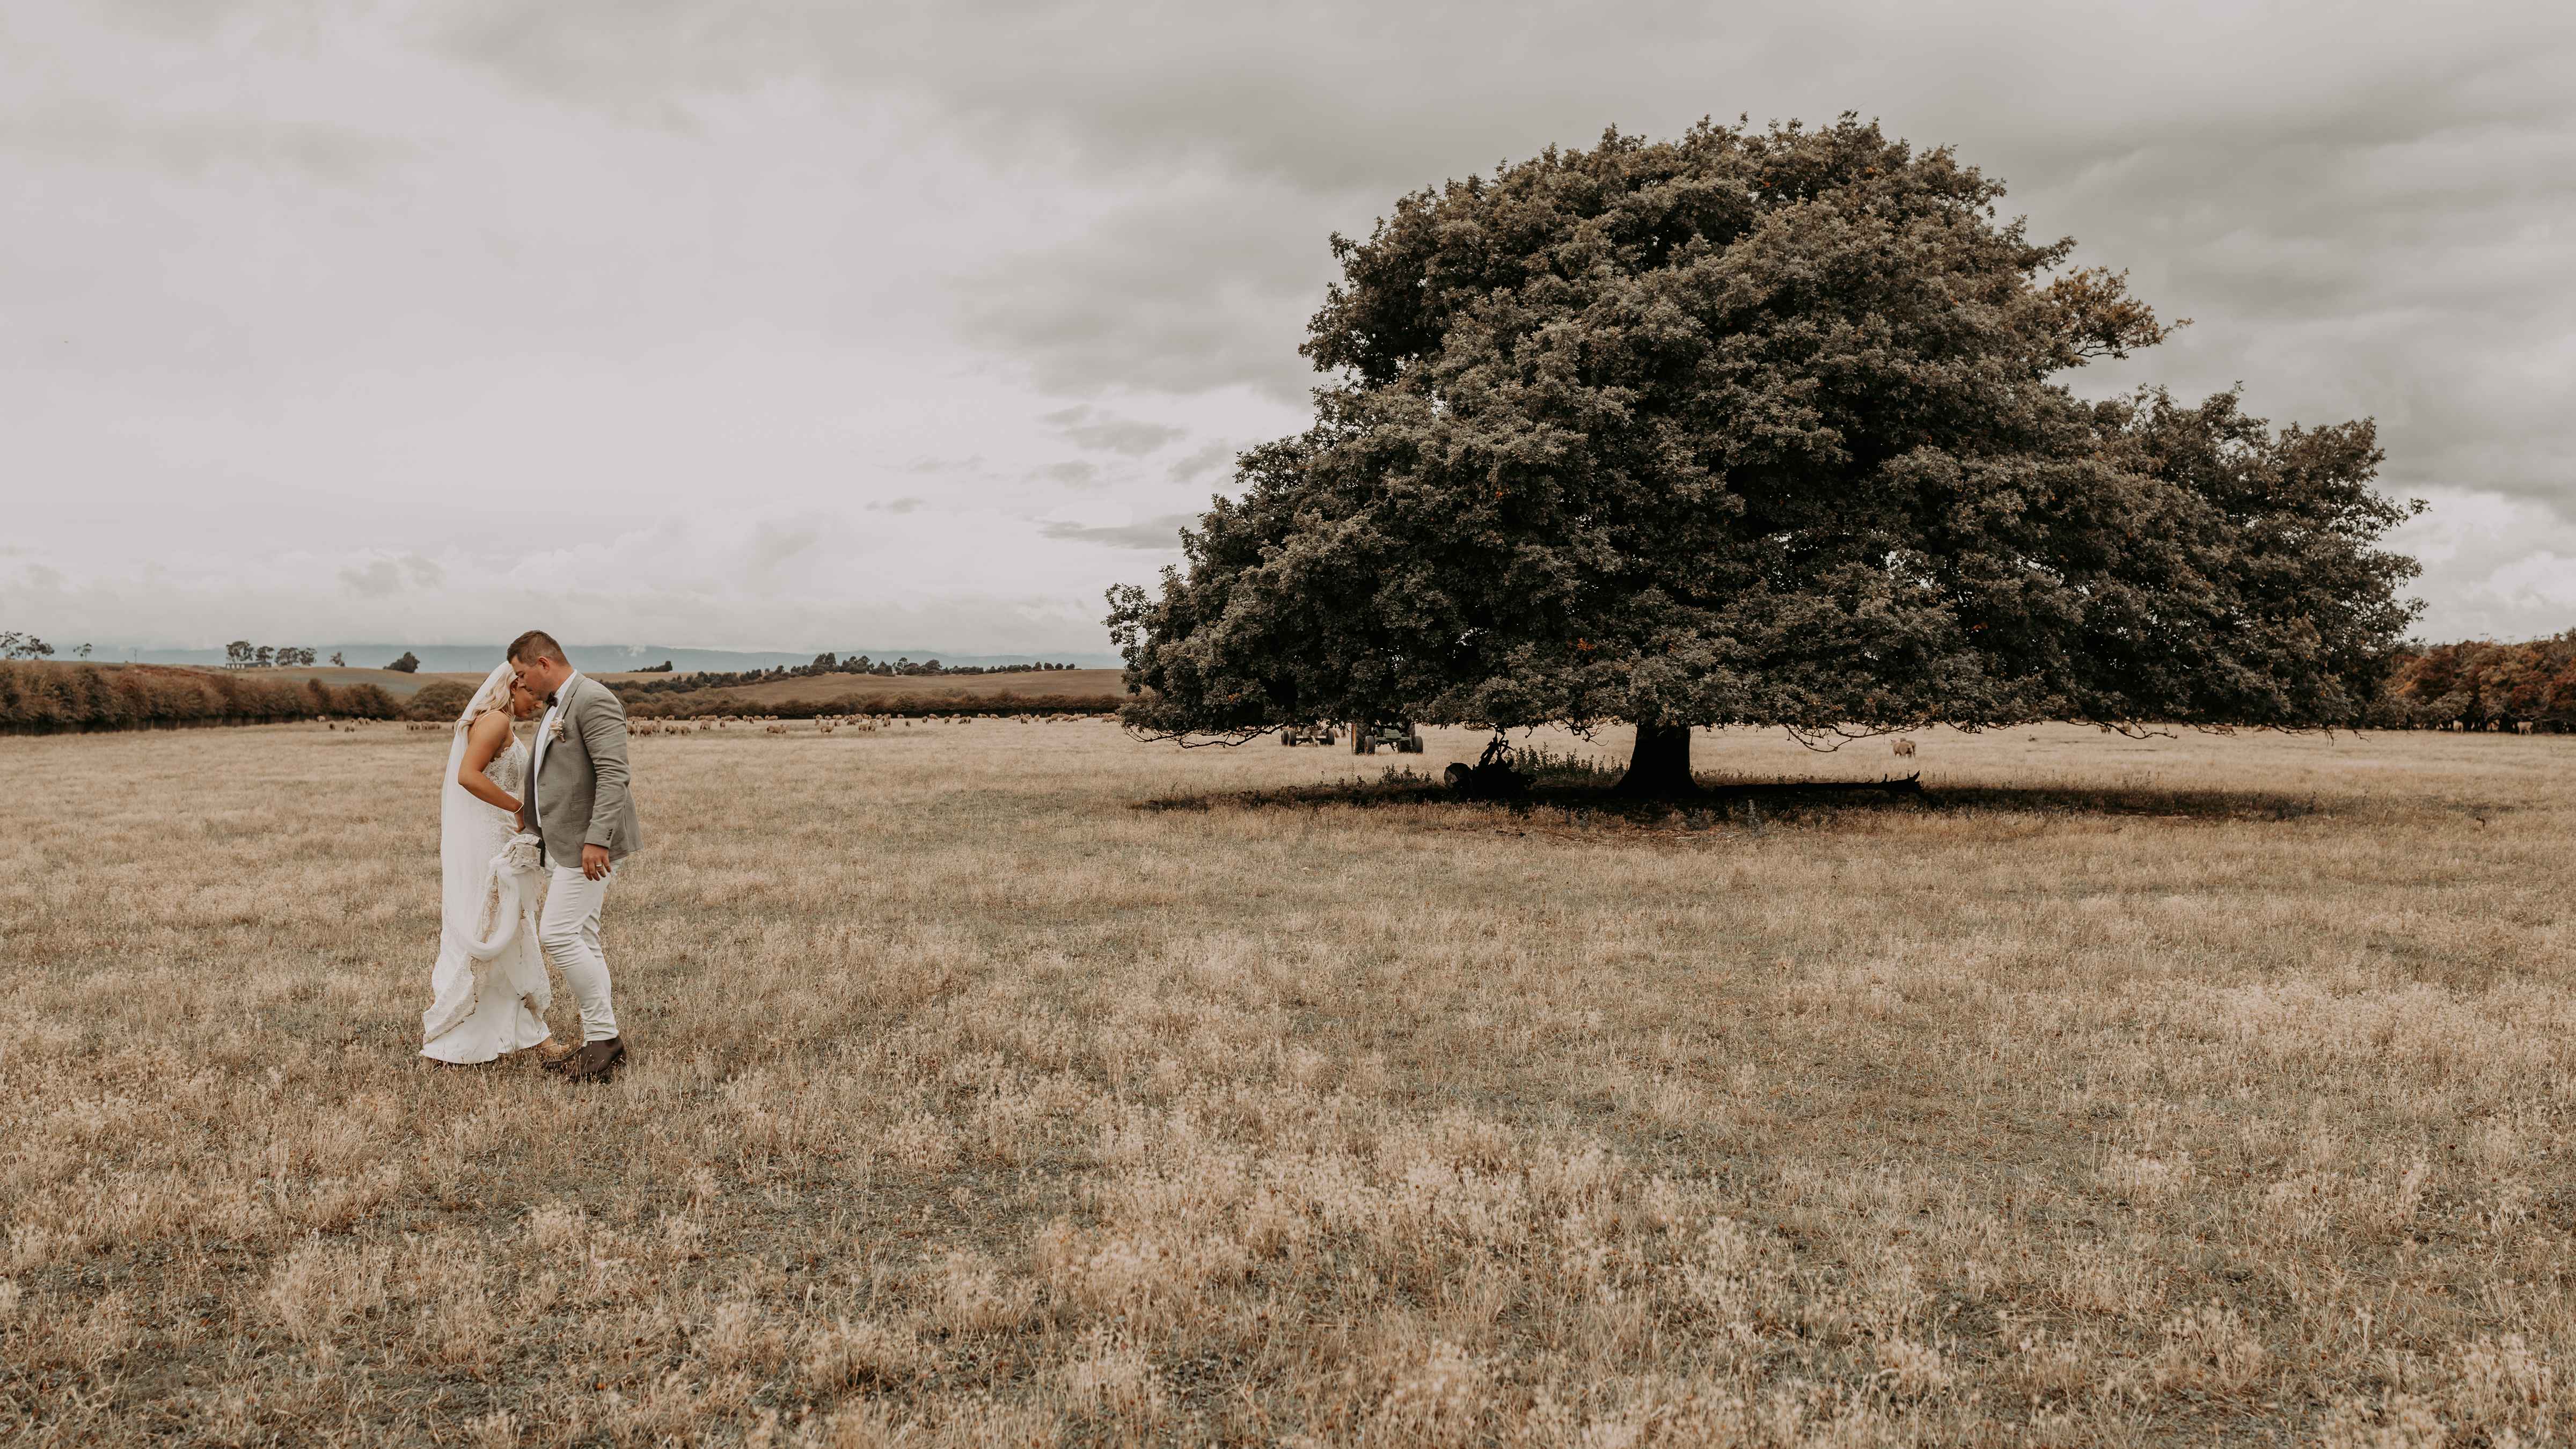 A bride and groom stand close to each other in a grassy paddock. A large oak tree is in the middle of the paddock with an overcast sky. Photo: Tiarne Shaw Photography.